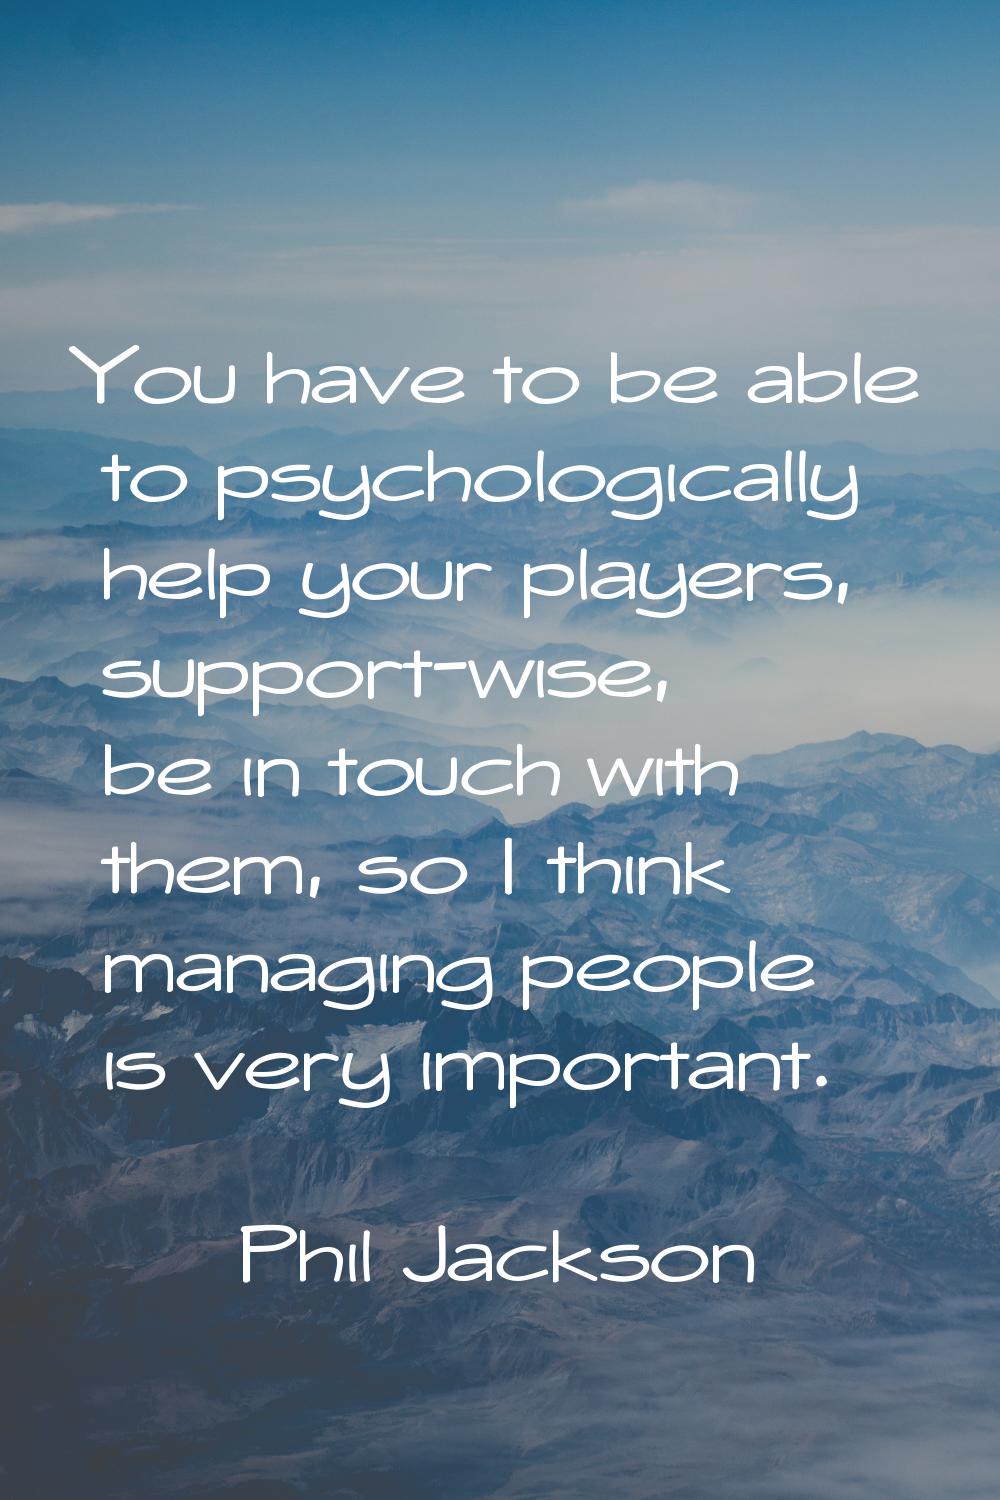 You have to be able to psychologically help your players, support-wise, be in touch with them, so I